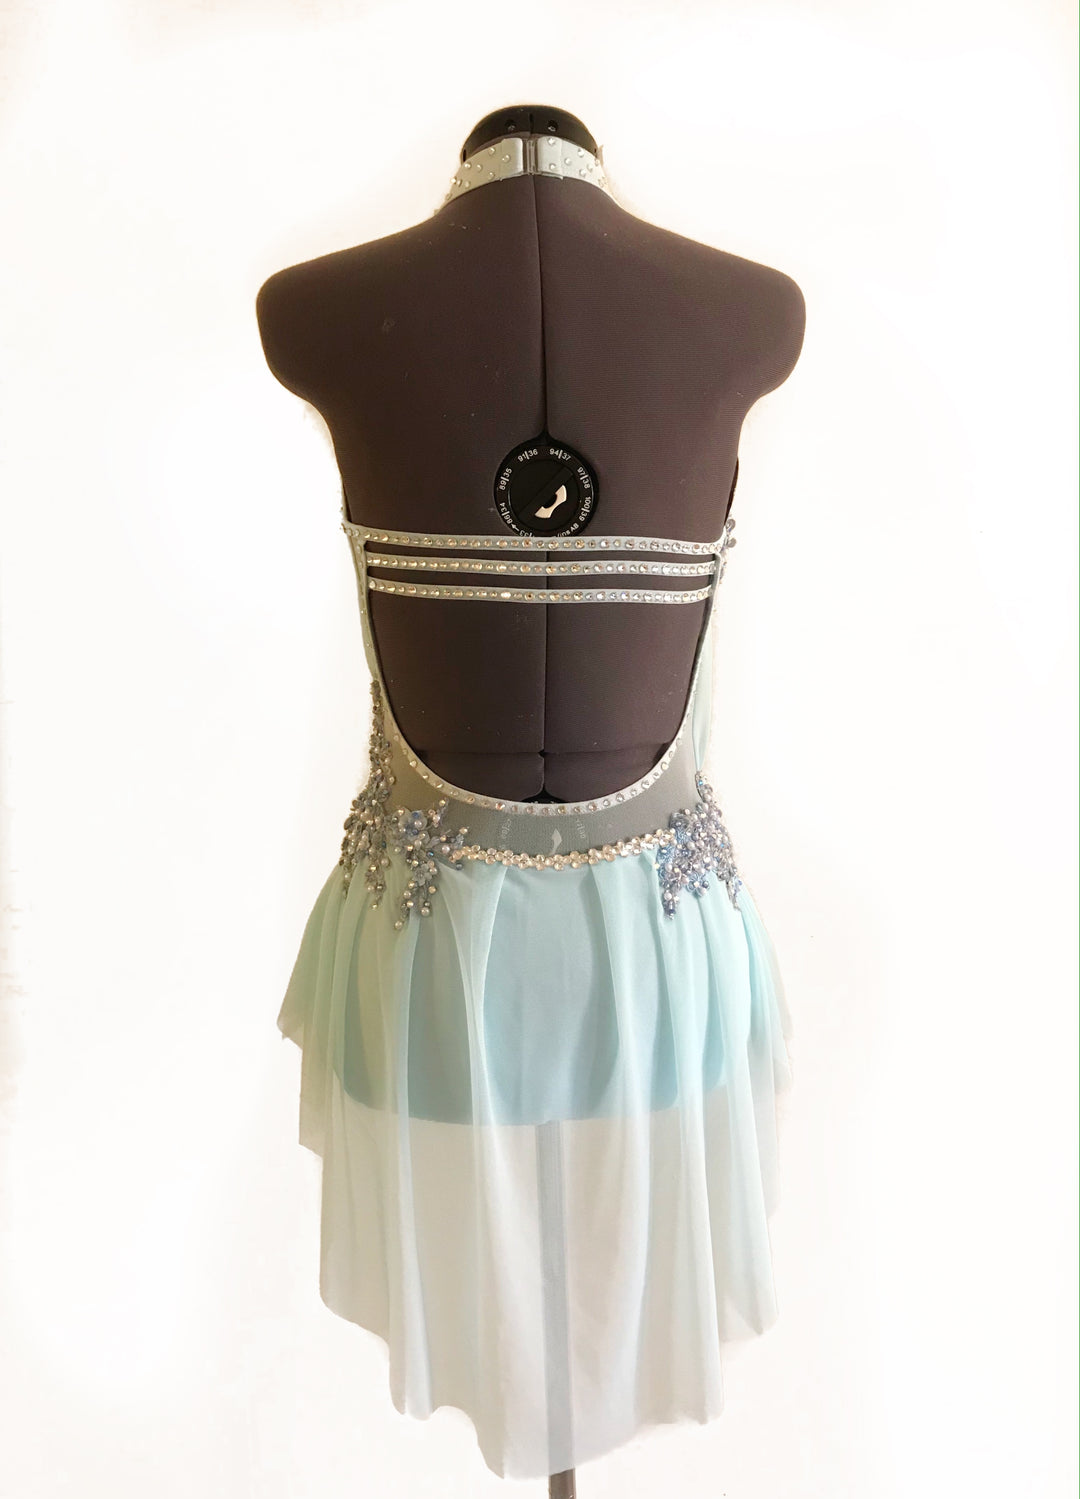 ADULT XSMALL ice blue lyrical/contemporary ready-to-ship dance costume